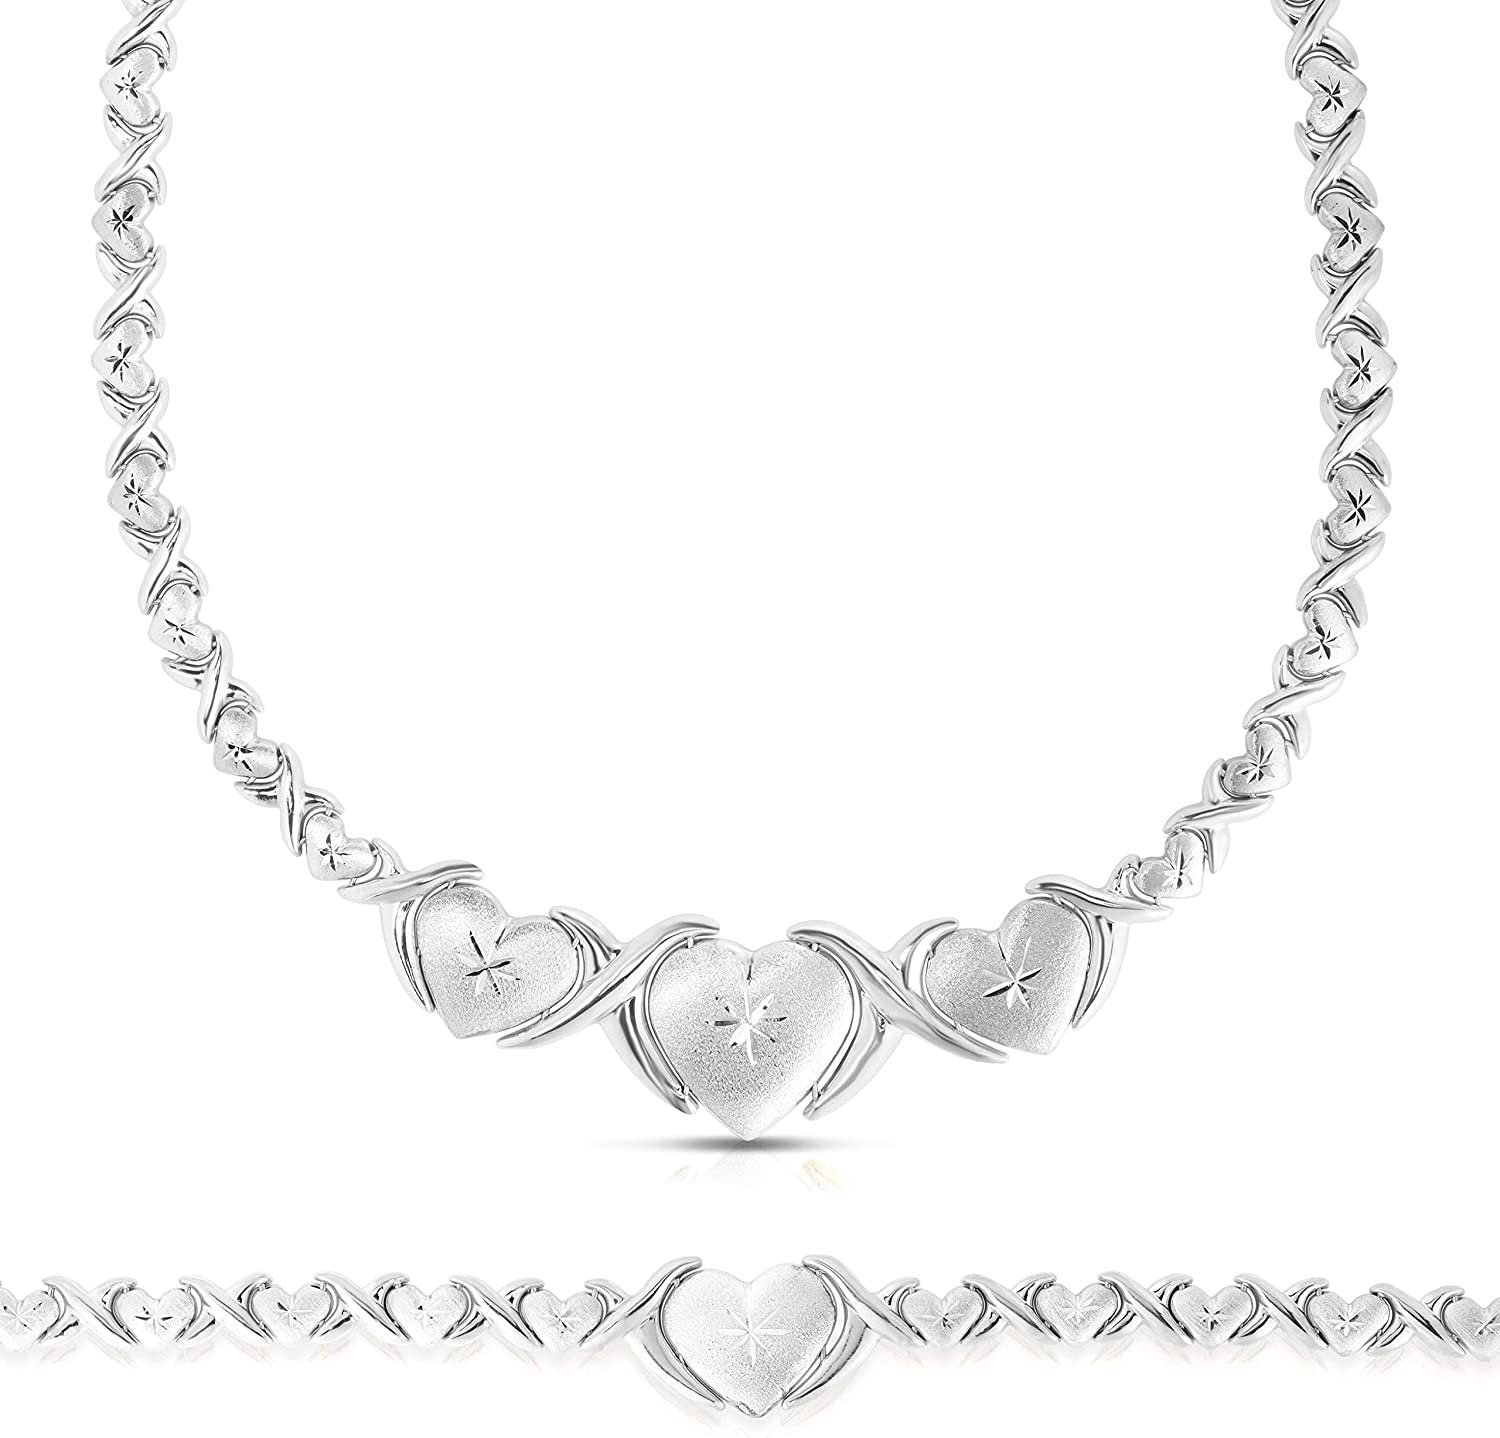 Floreo 925 Sterling Silver Stampato XOXO Hugs and Kisses with Graduating Heart Pendant Bracelet and Necklace Set